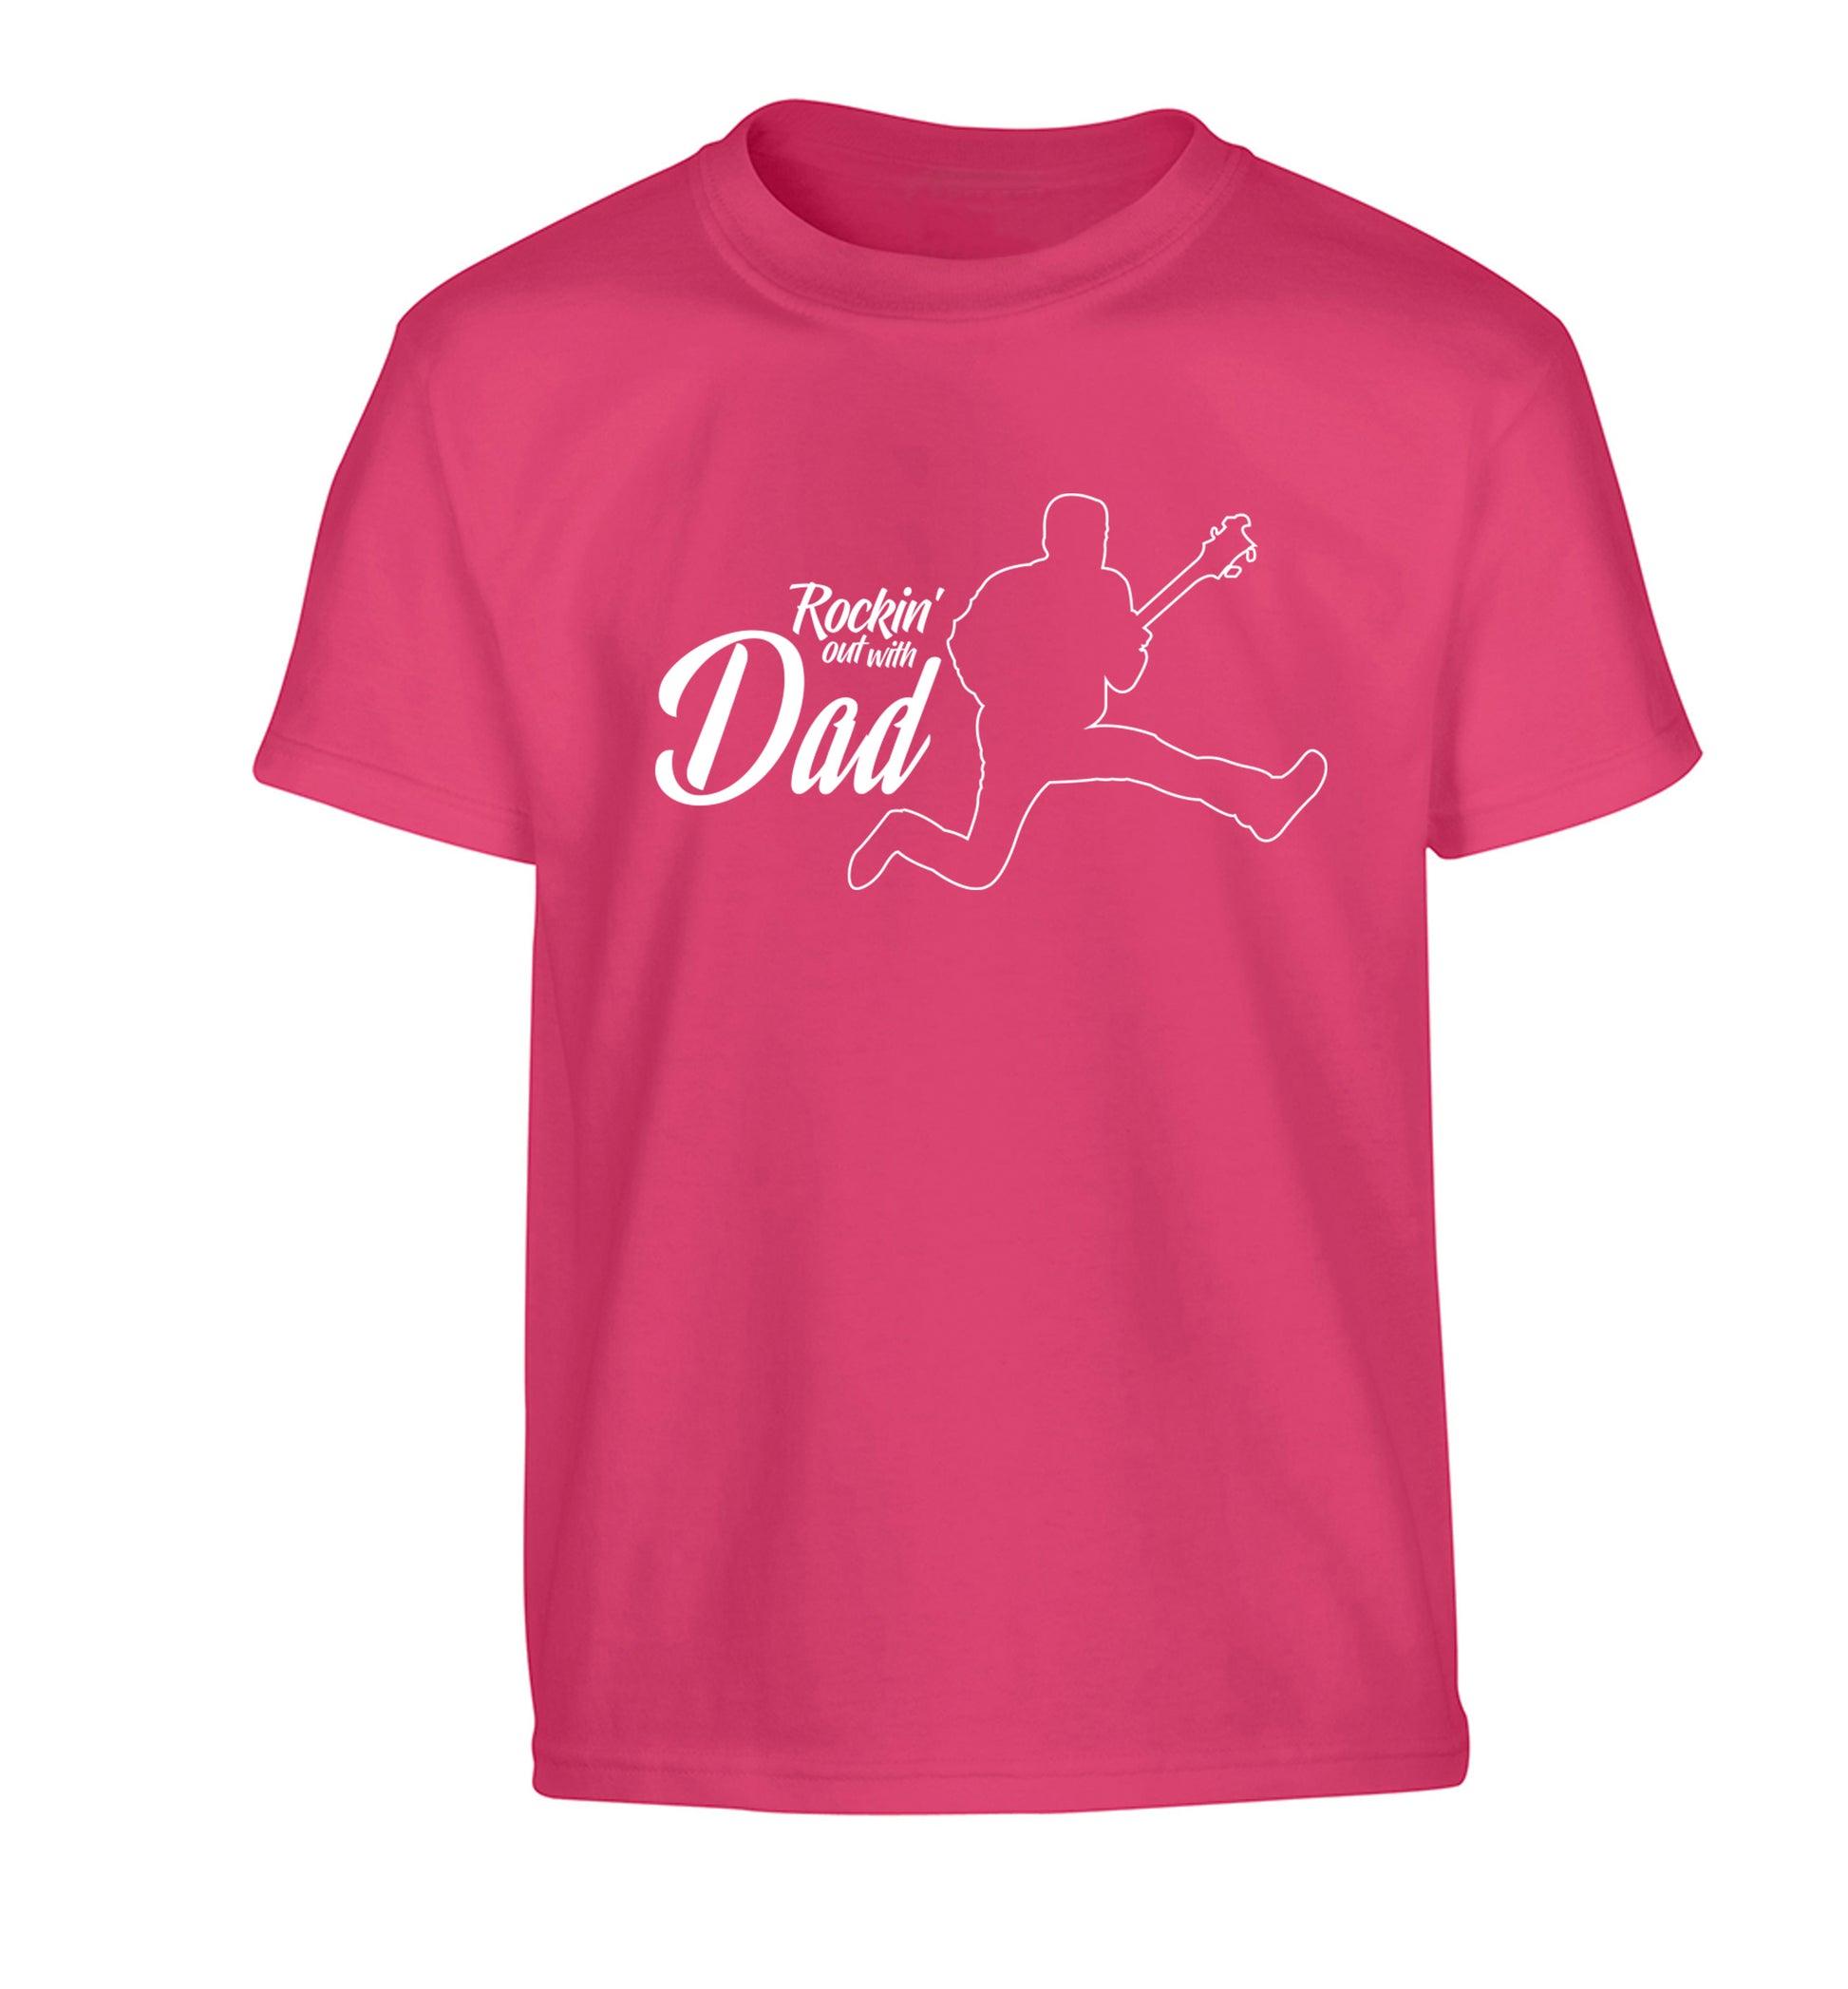 Rockin out with dad Children's pink Tshirt 12-13 Years